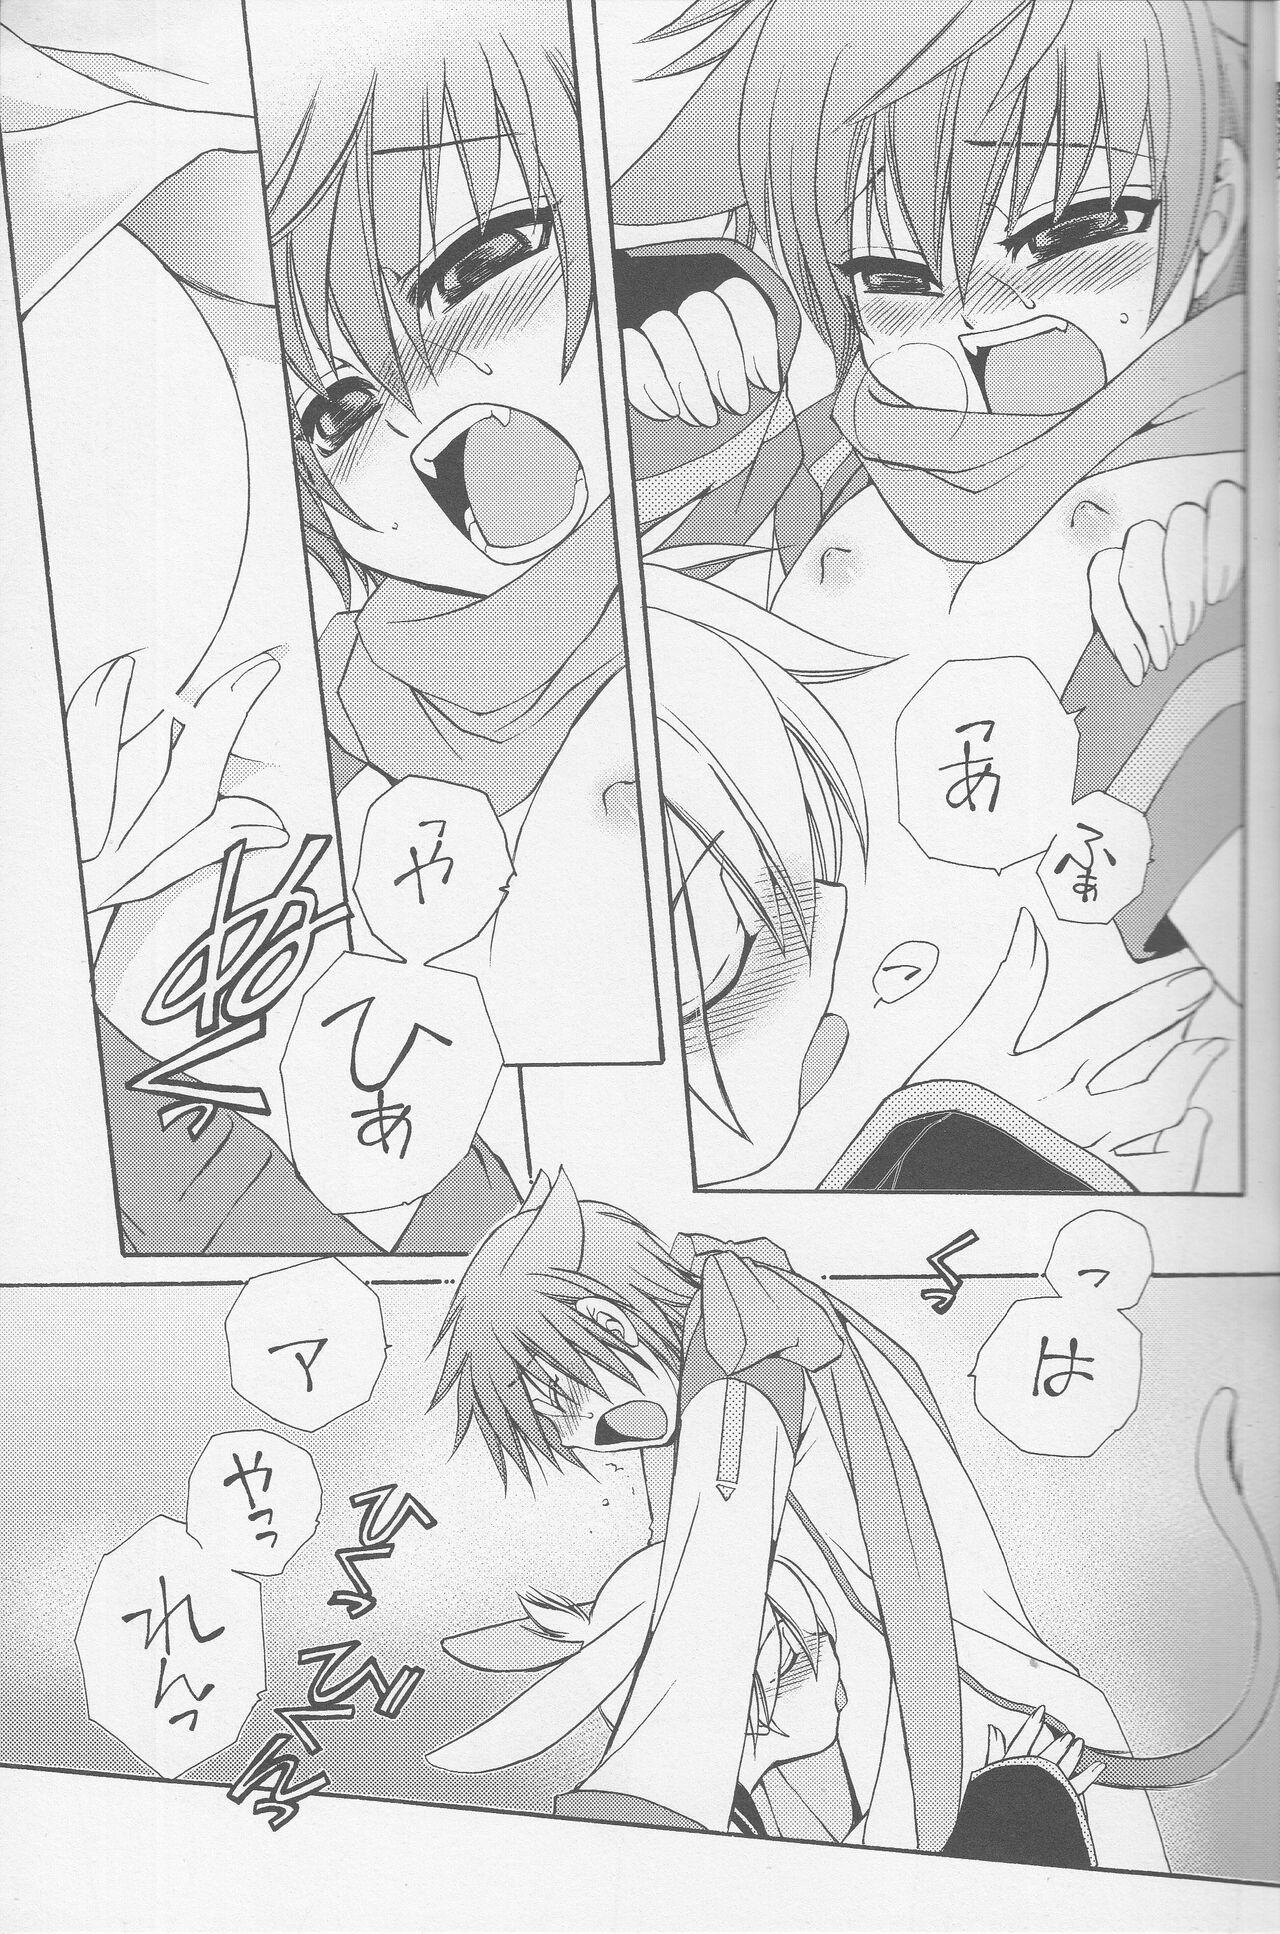 Lesbos Obaka-chan. - Vocaloid Gay Amateur - Page 10